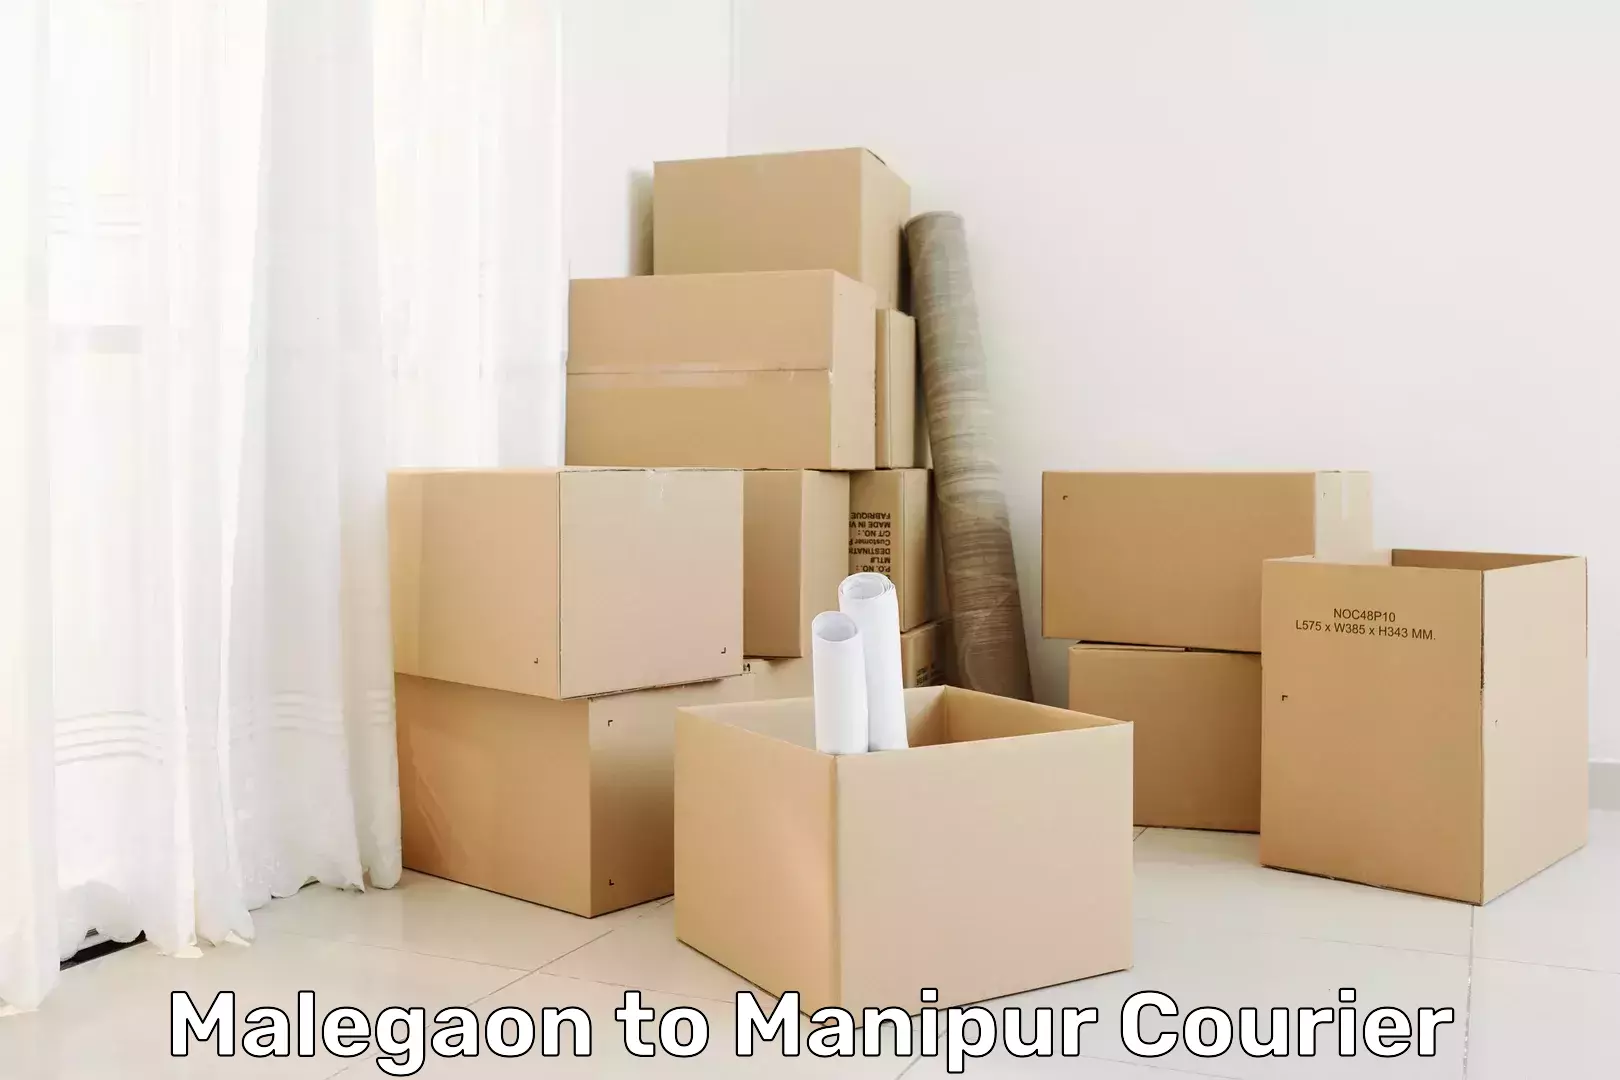 Courier service comparison Malegaon to Imphal